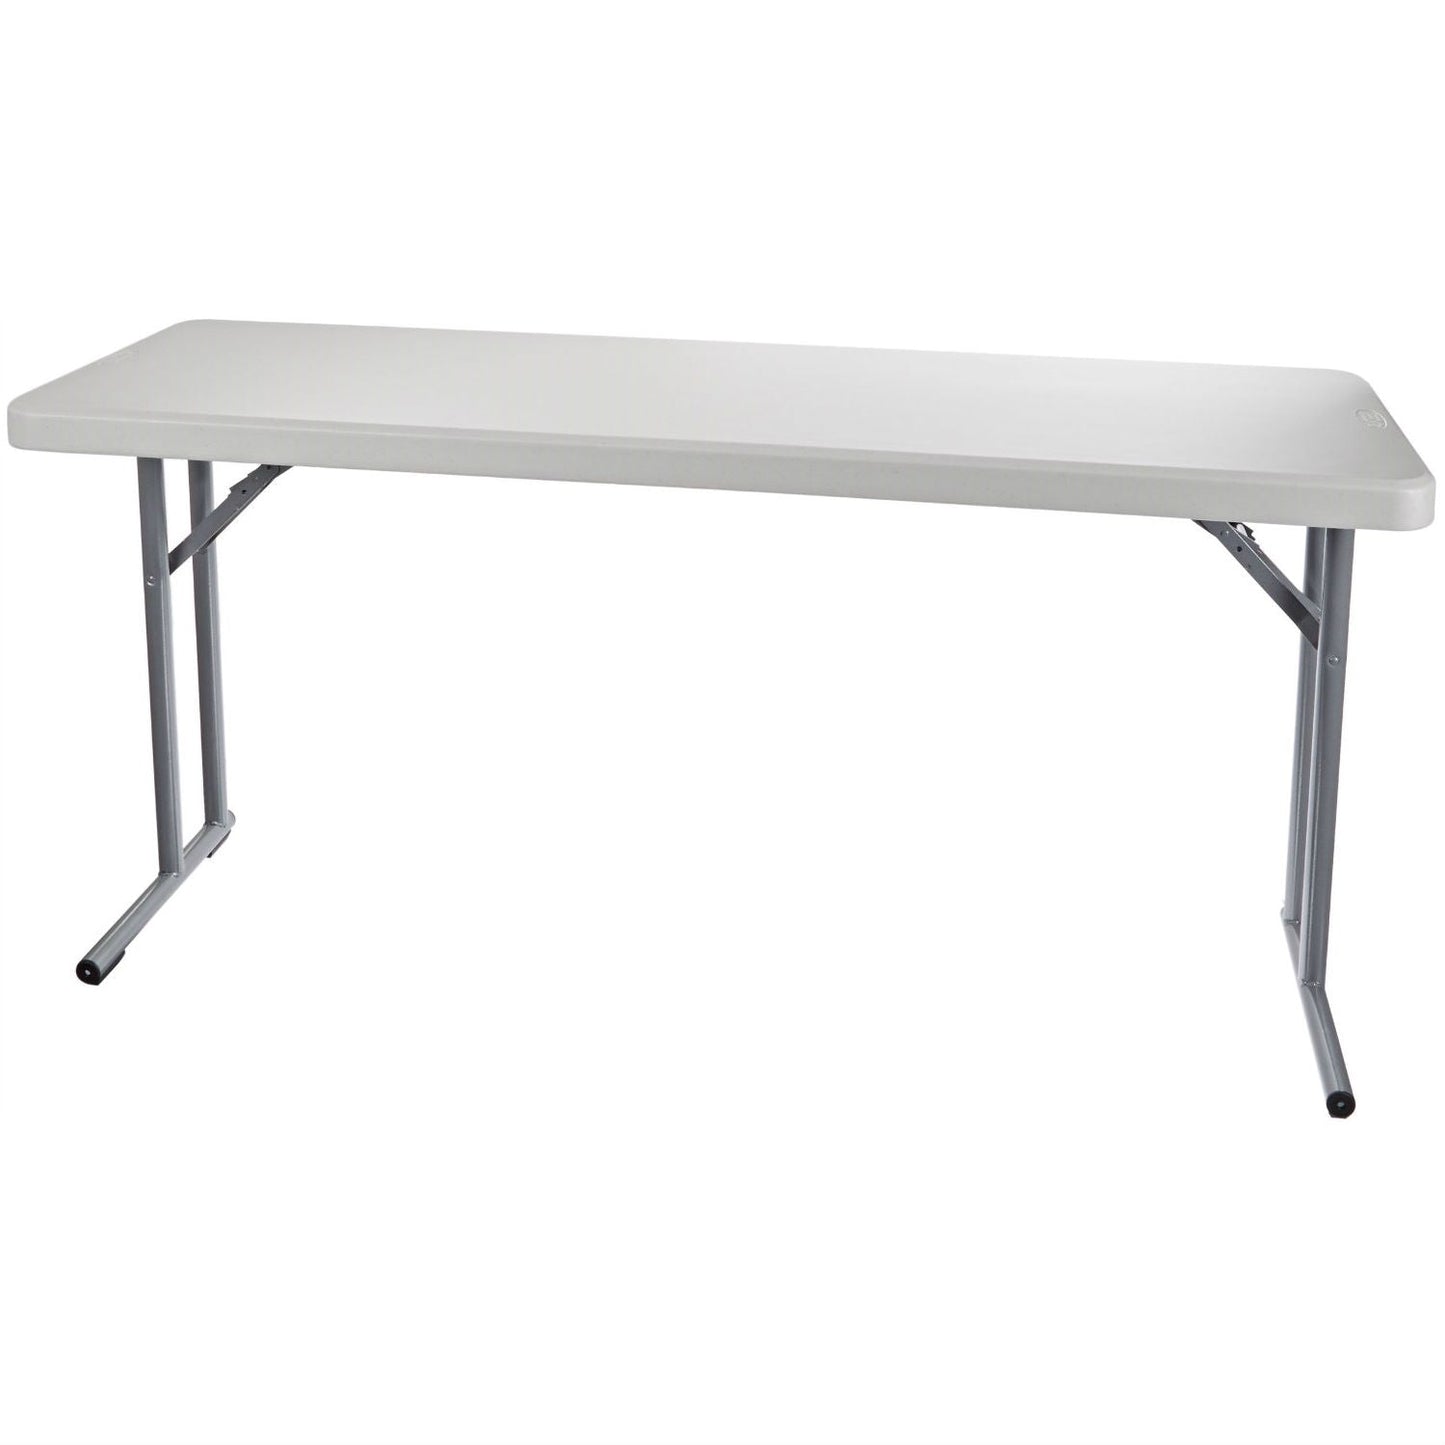 Office > Folding Tables - Steel Frame Rectangular Folding Table With Speckled Gray Top